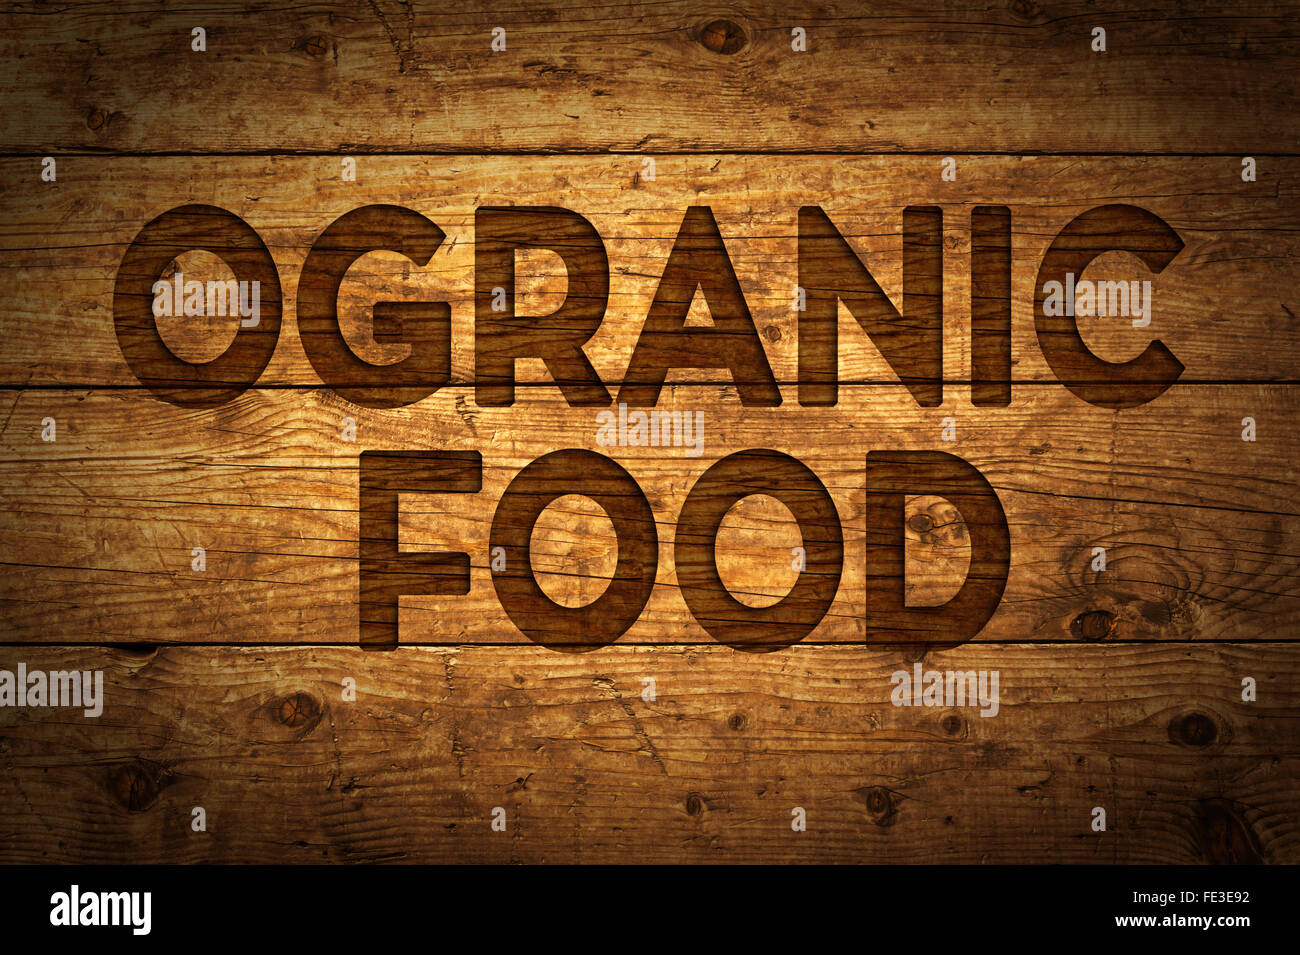 Grunge wood with text Organic Food. Stock Photo